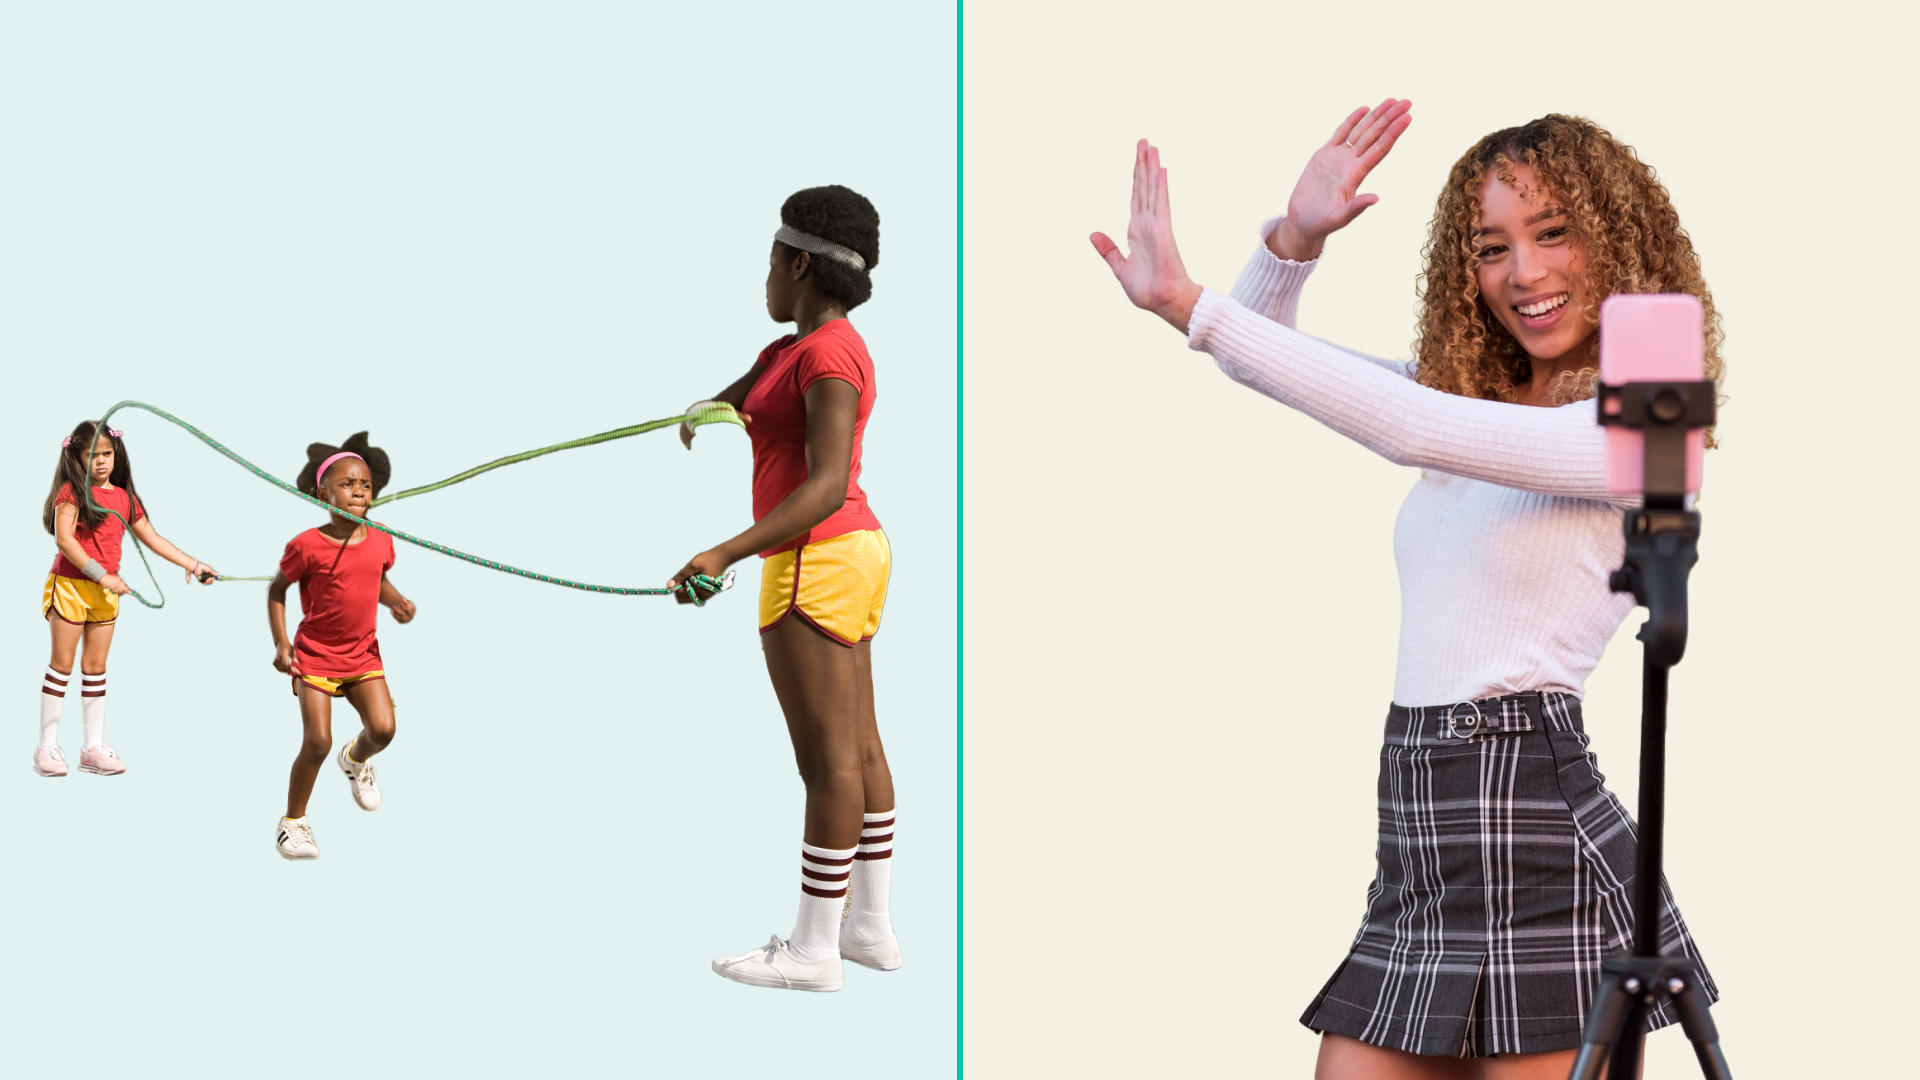 Back to School Trends in the ‘90s vs Today: After School